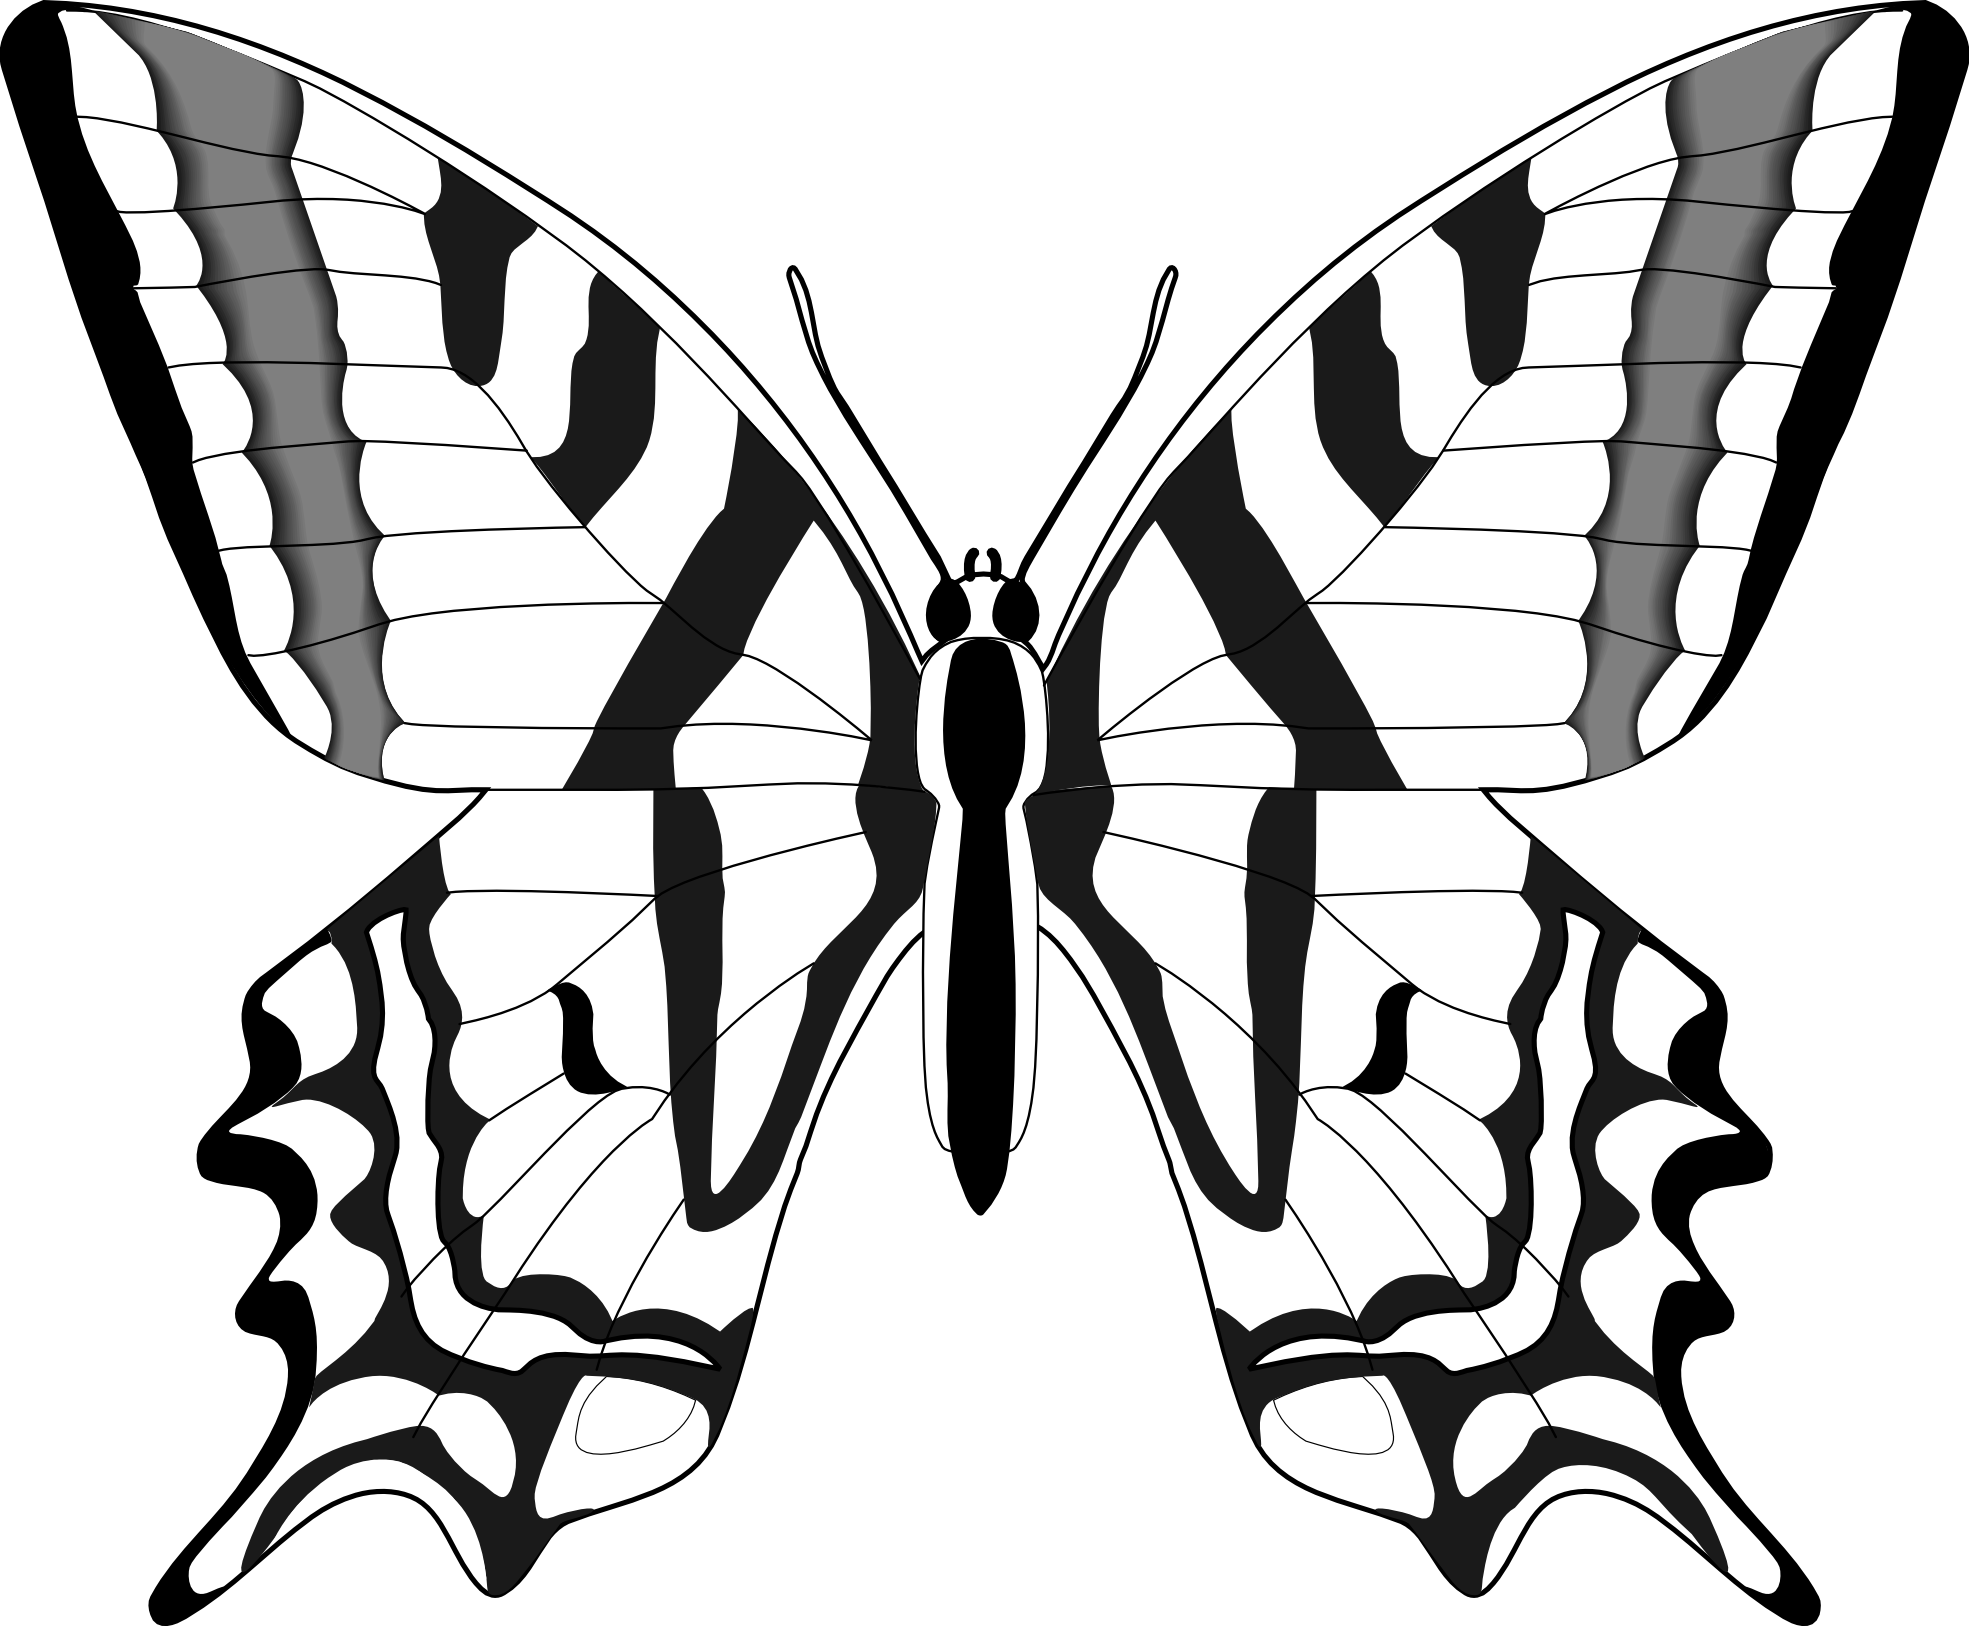 Free Butterfly Images Black And White, Download Free Butterfly Images